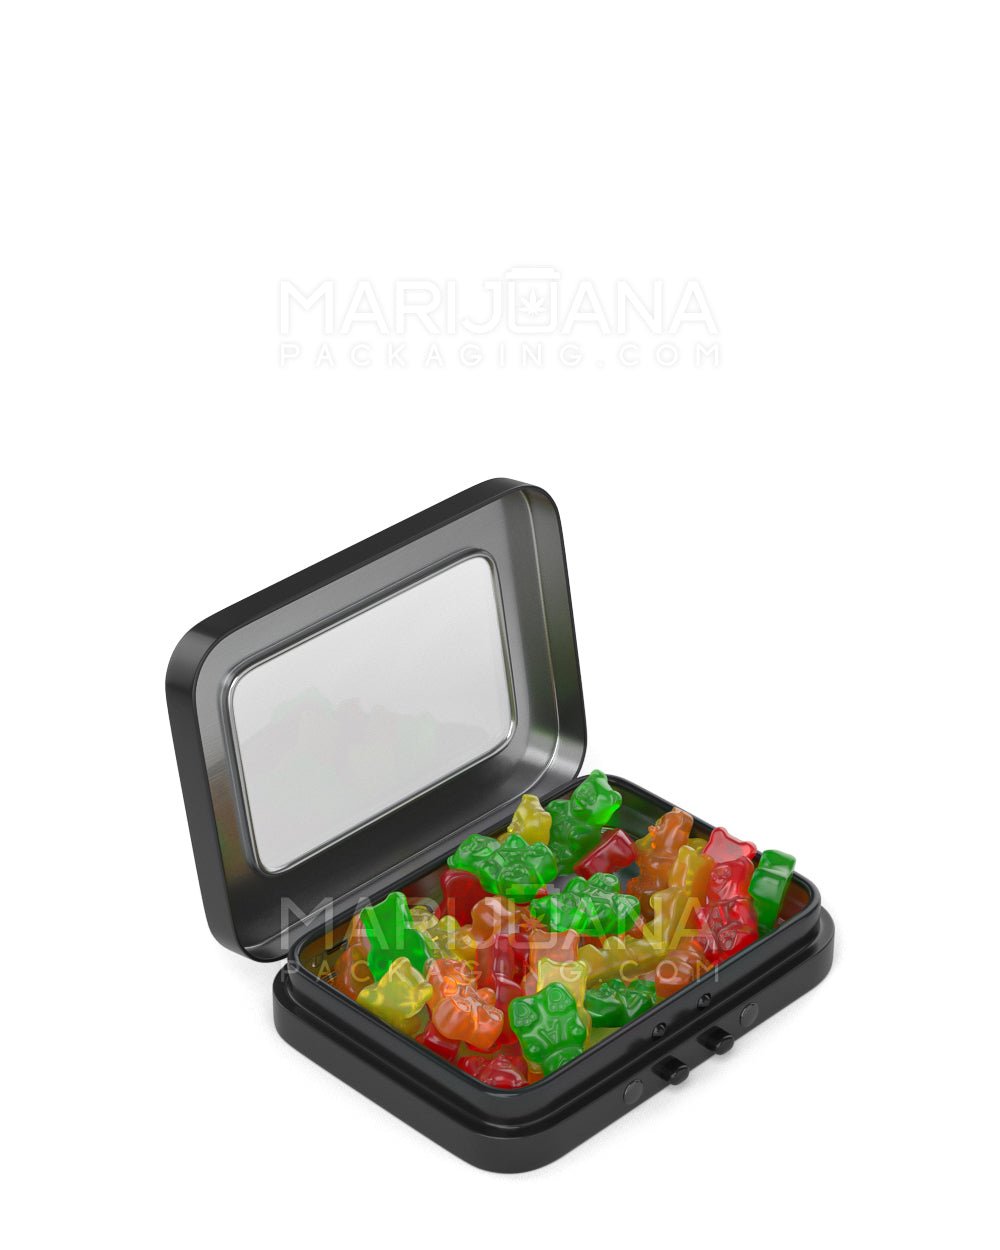 Child Resistant & Sustainable | Hinged-Lid Mini Size Vista Edible & Joint Box w/ See-Through Window |  Black Tin  - 2